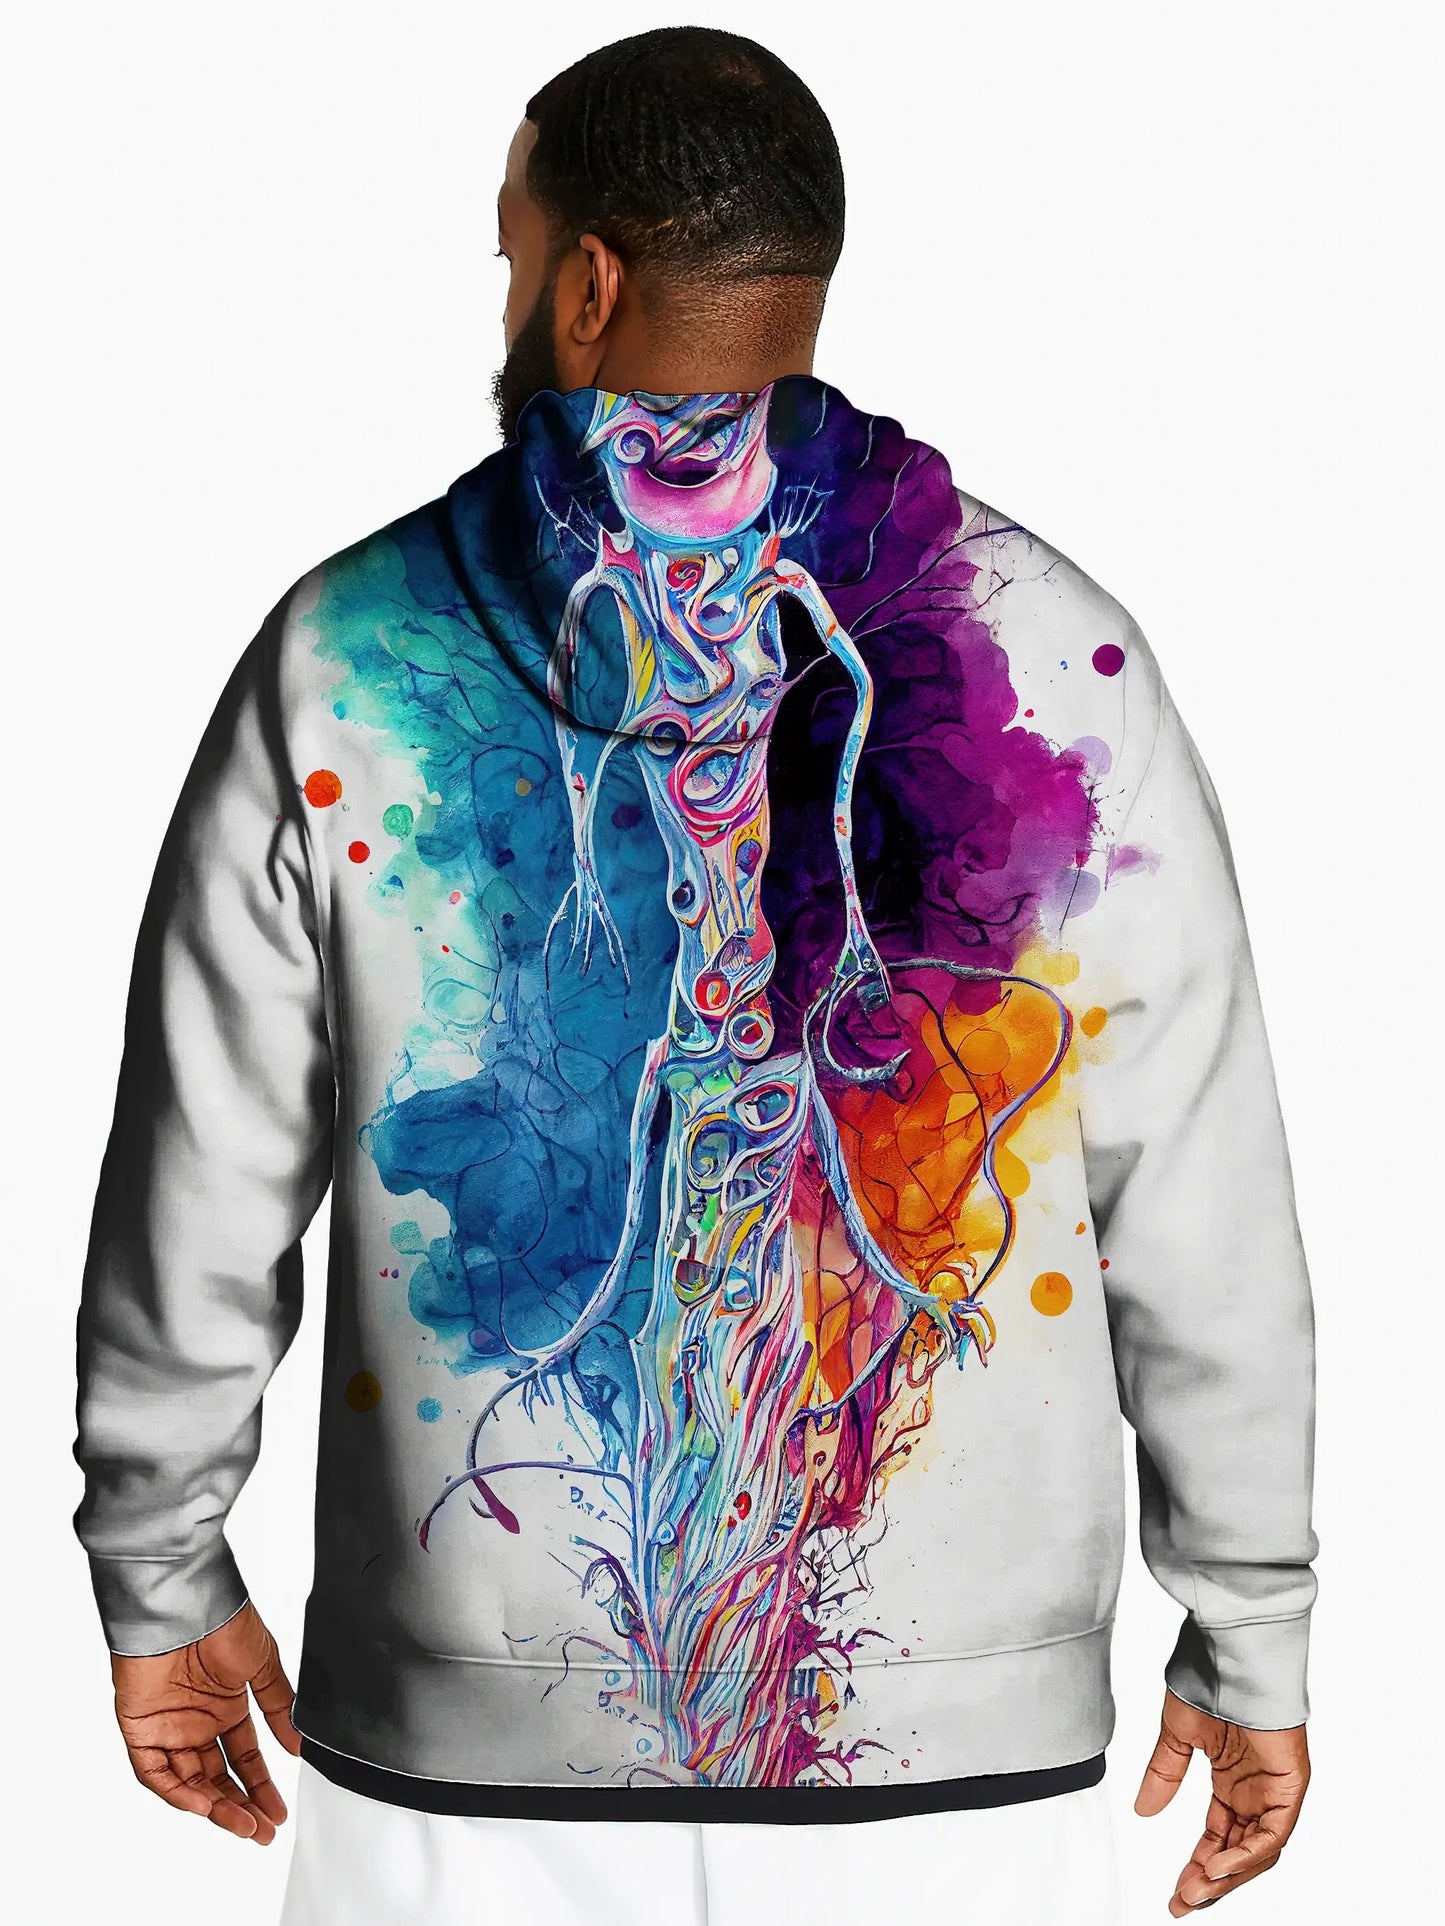 Elated Expansion Unisex Pullover Hoodie - EDM Festival Clothing - Boogie Threads